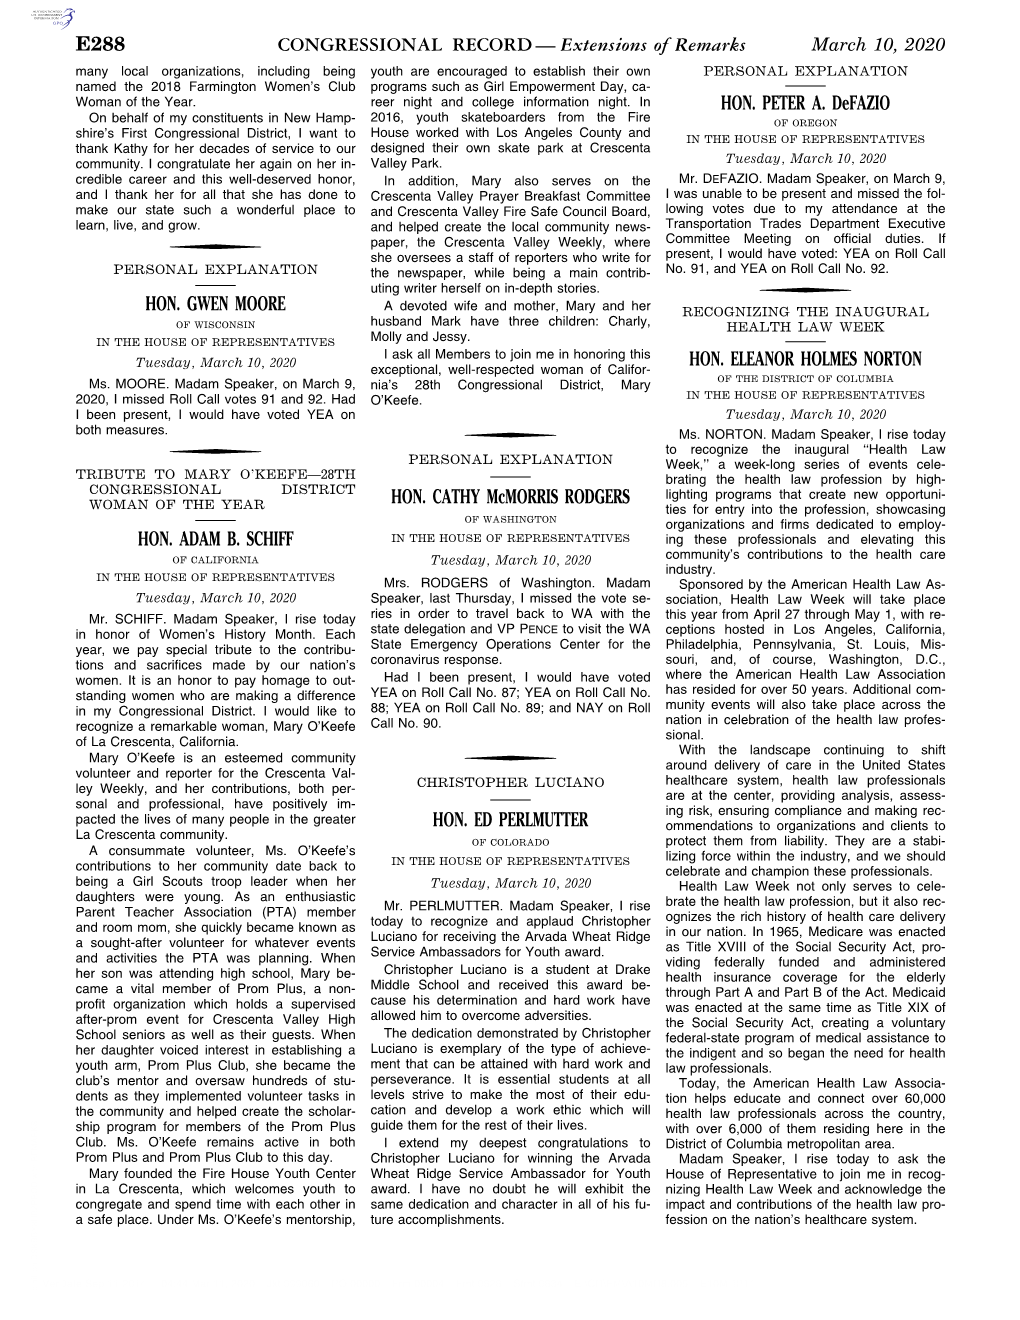 CONGRESSIONAL RECORD— Extensions of Remarks E288 HON